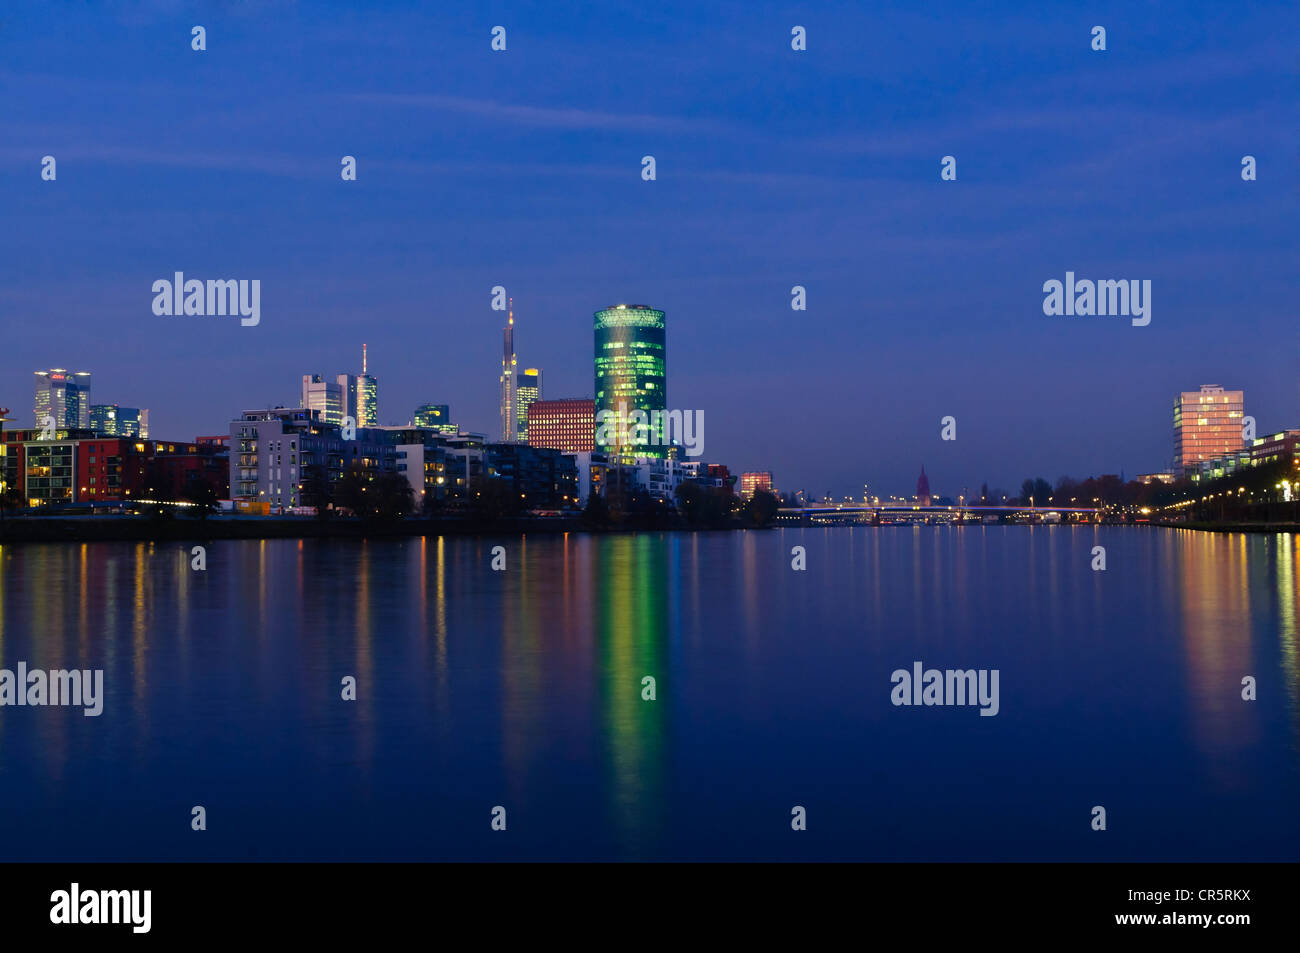 Skyline of Frankfurt at night from the south-west bank of the Main river, Frankfurt am Main, Hesse, Germany, Europe Stock Photo